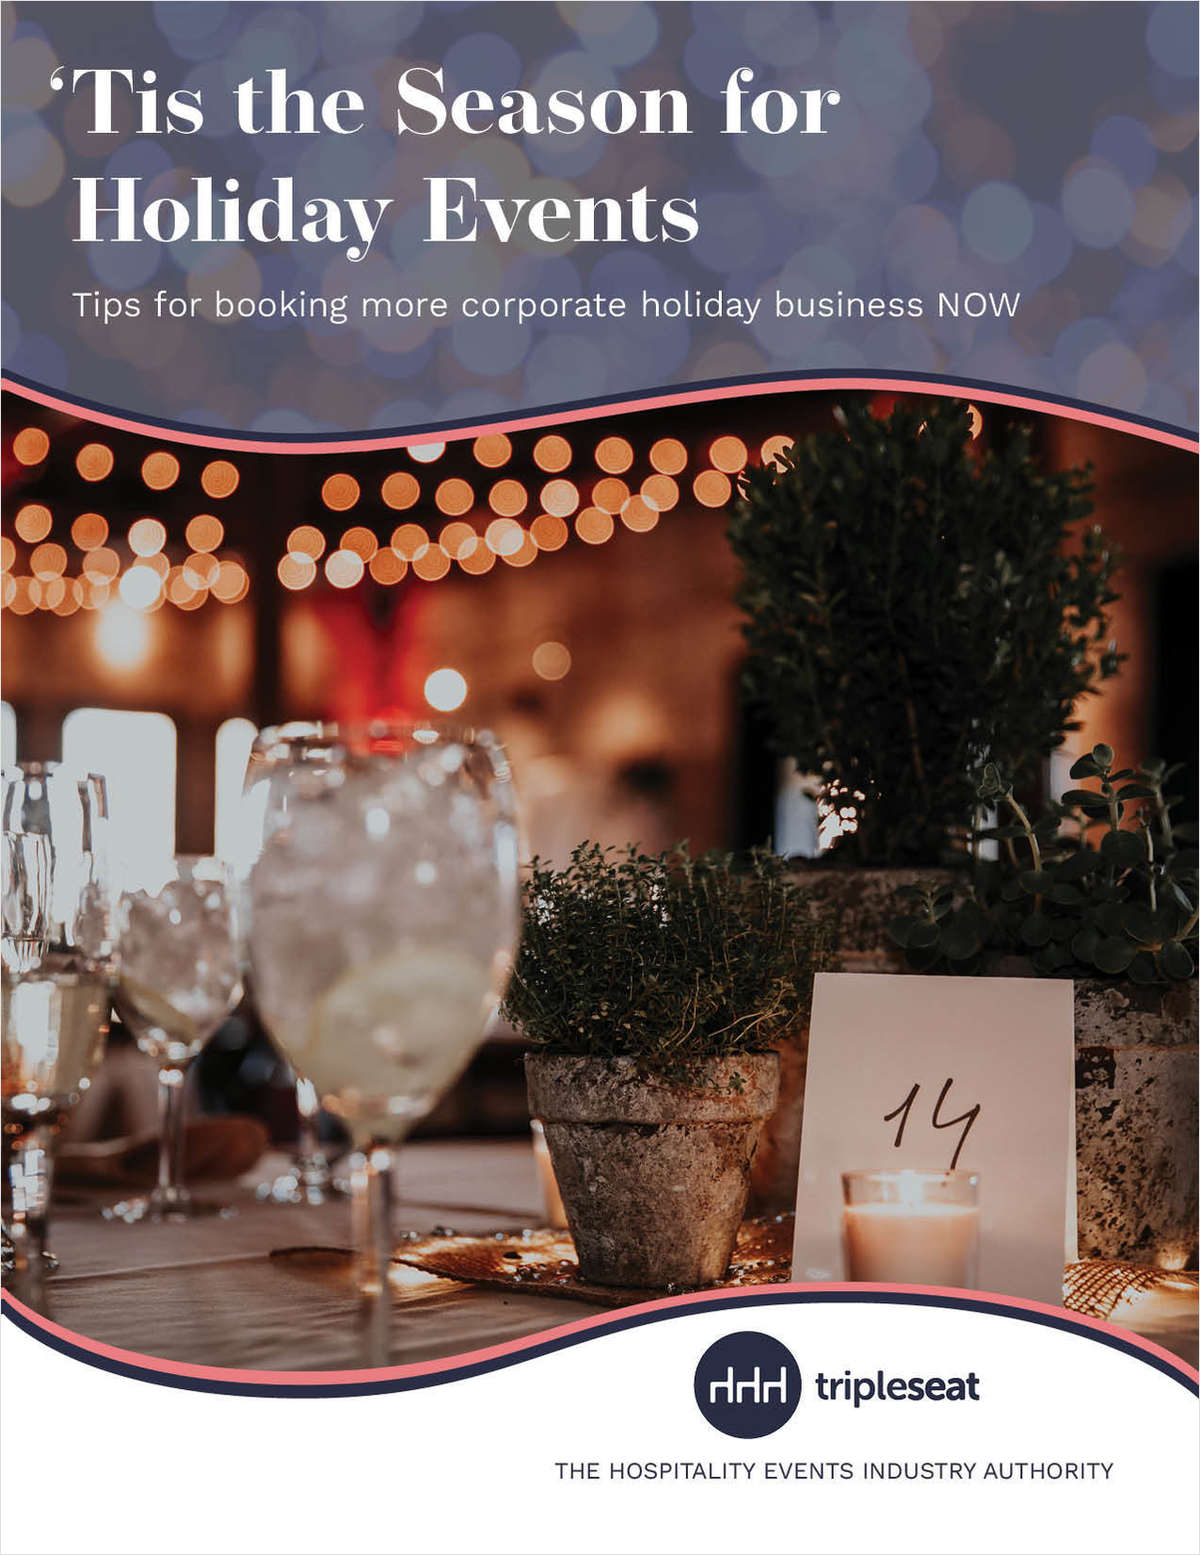 'Tis the Season for Holiday Events